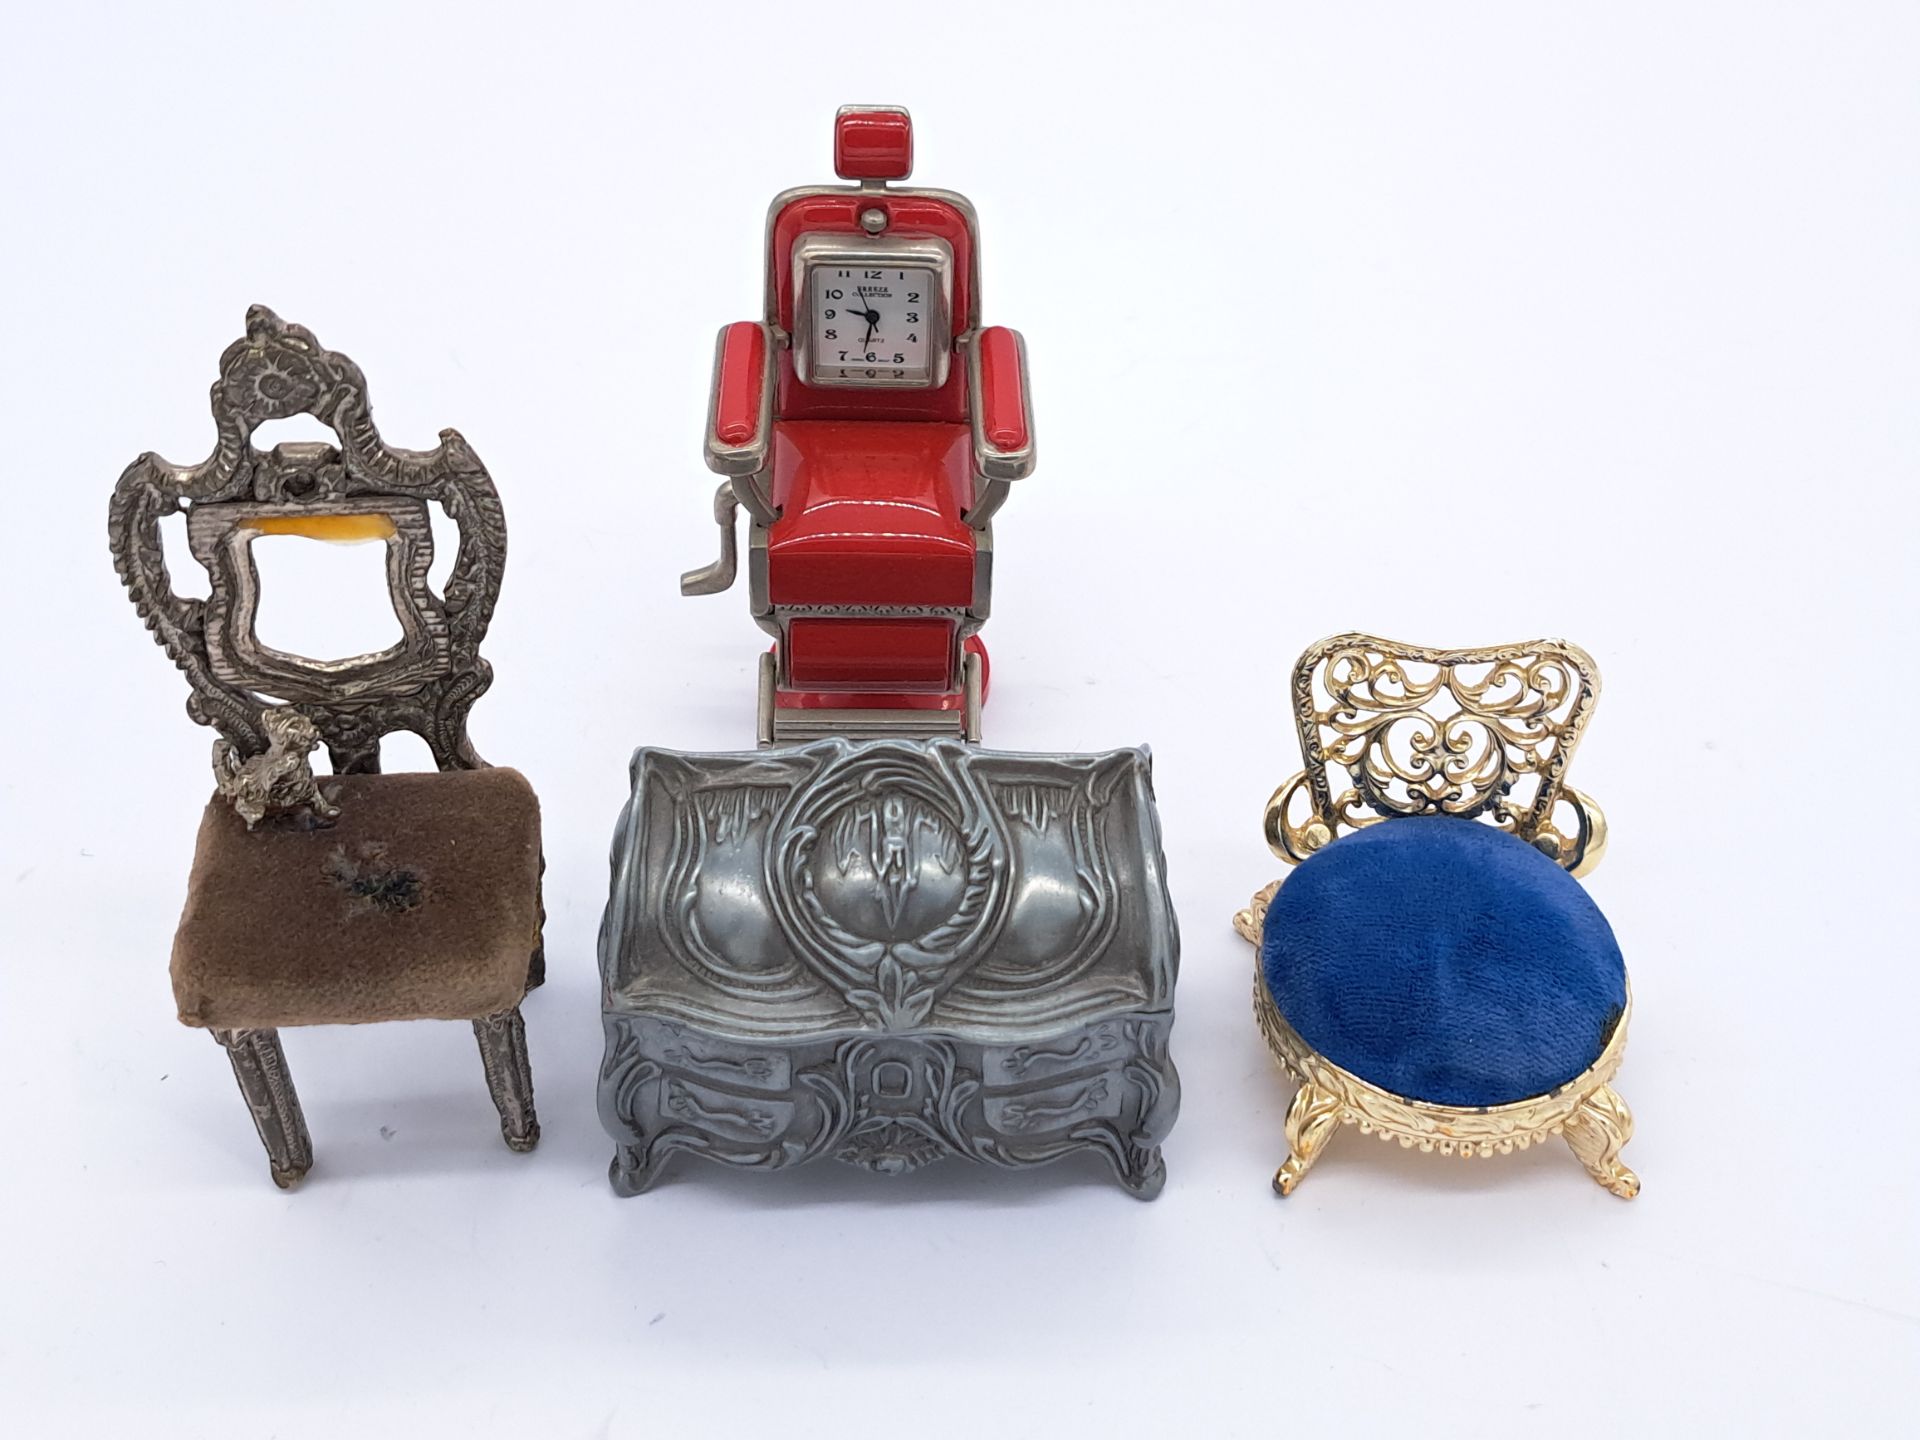 Miniature cast metal and other doll's house furniture / novelties - Image 4 of 4